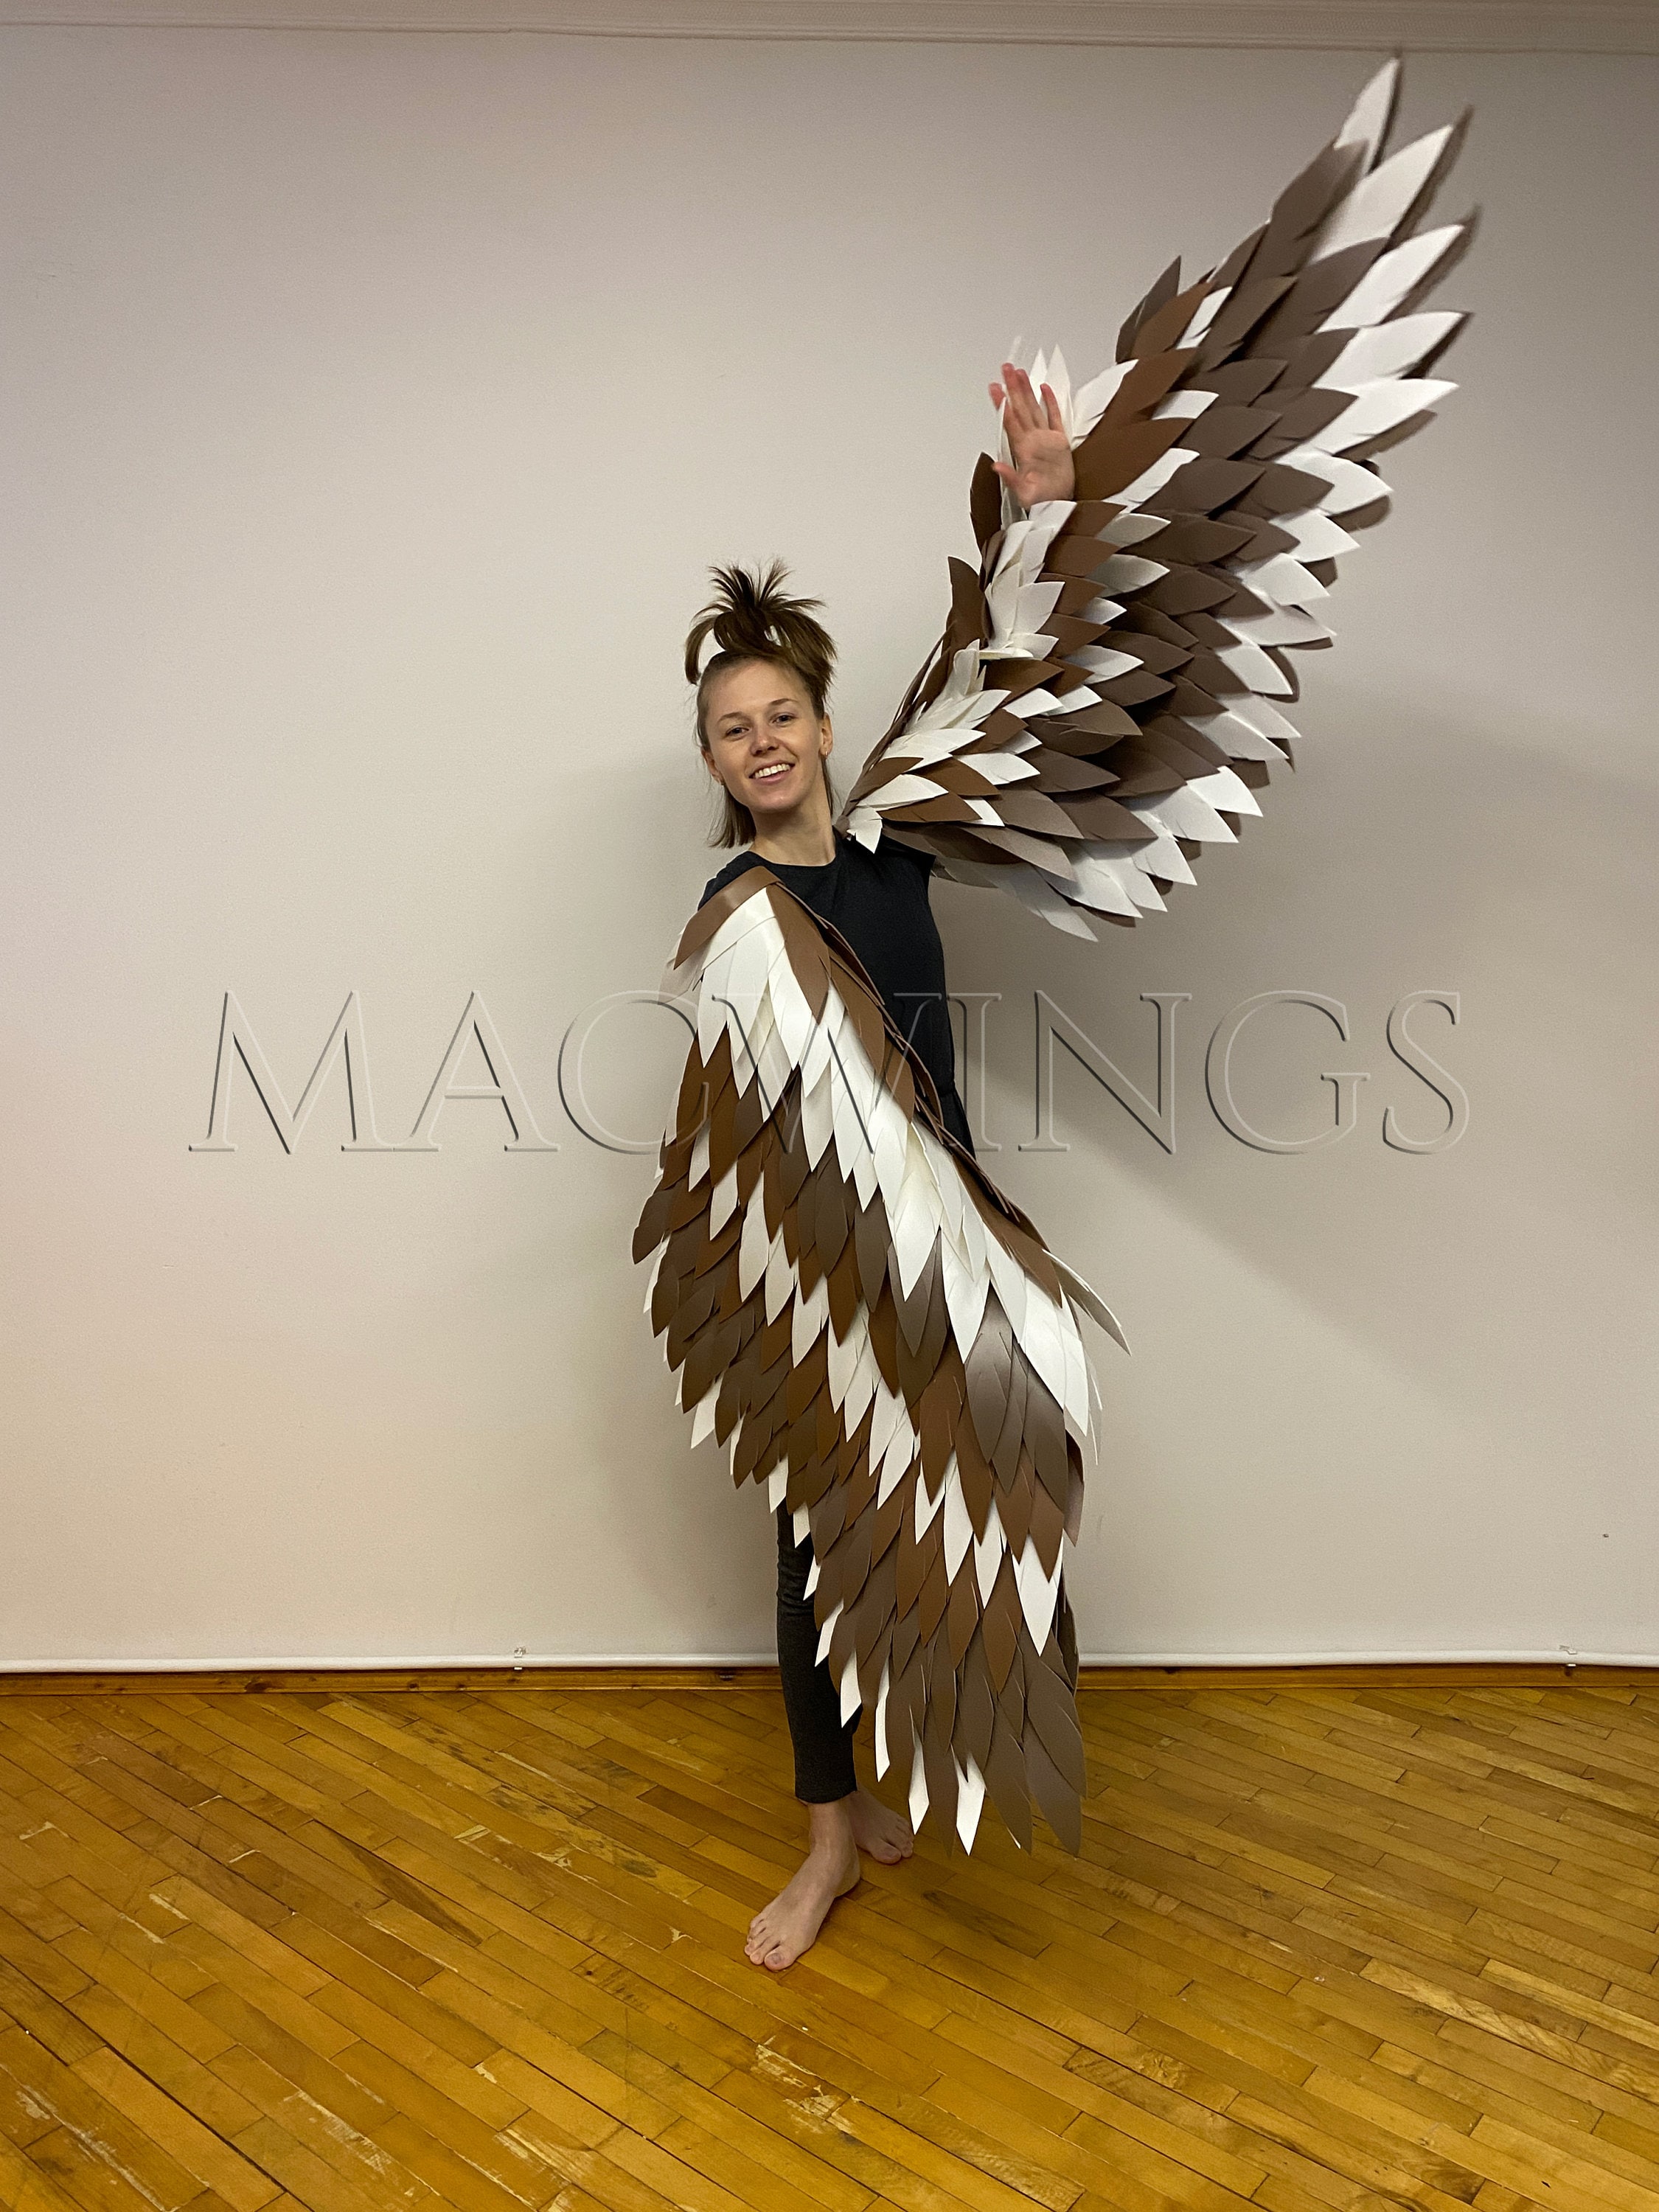 Bird Wings and Tail, Bird Costume, Eagle Costume, Bird Cosplay Costume,  Hawk Wings, Hawk Costume, Adult Wings, Wings for Adult Person 